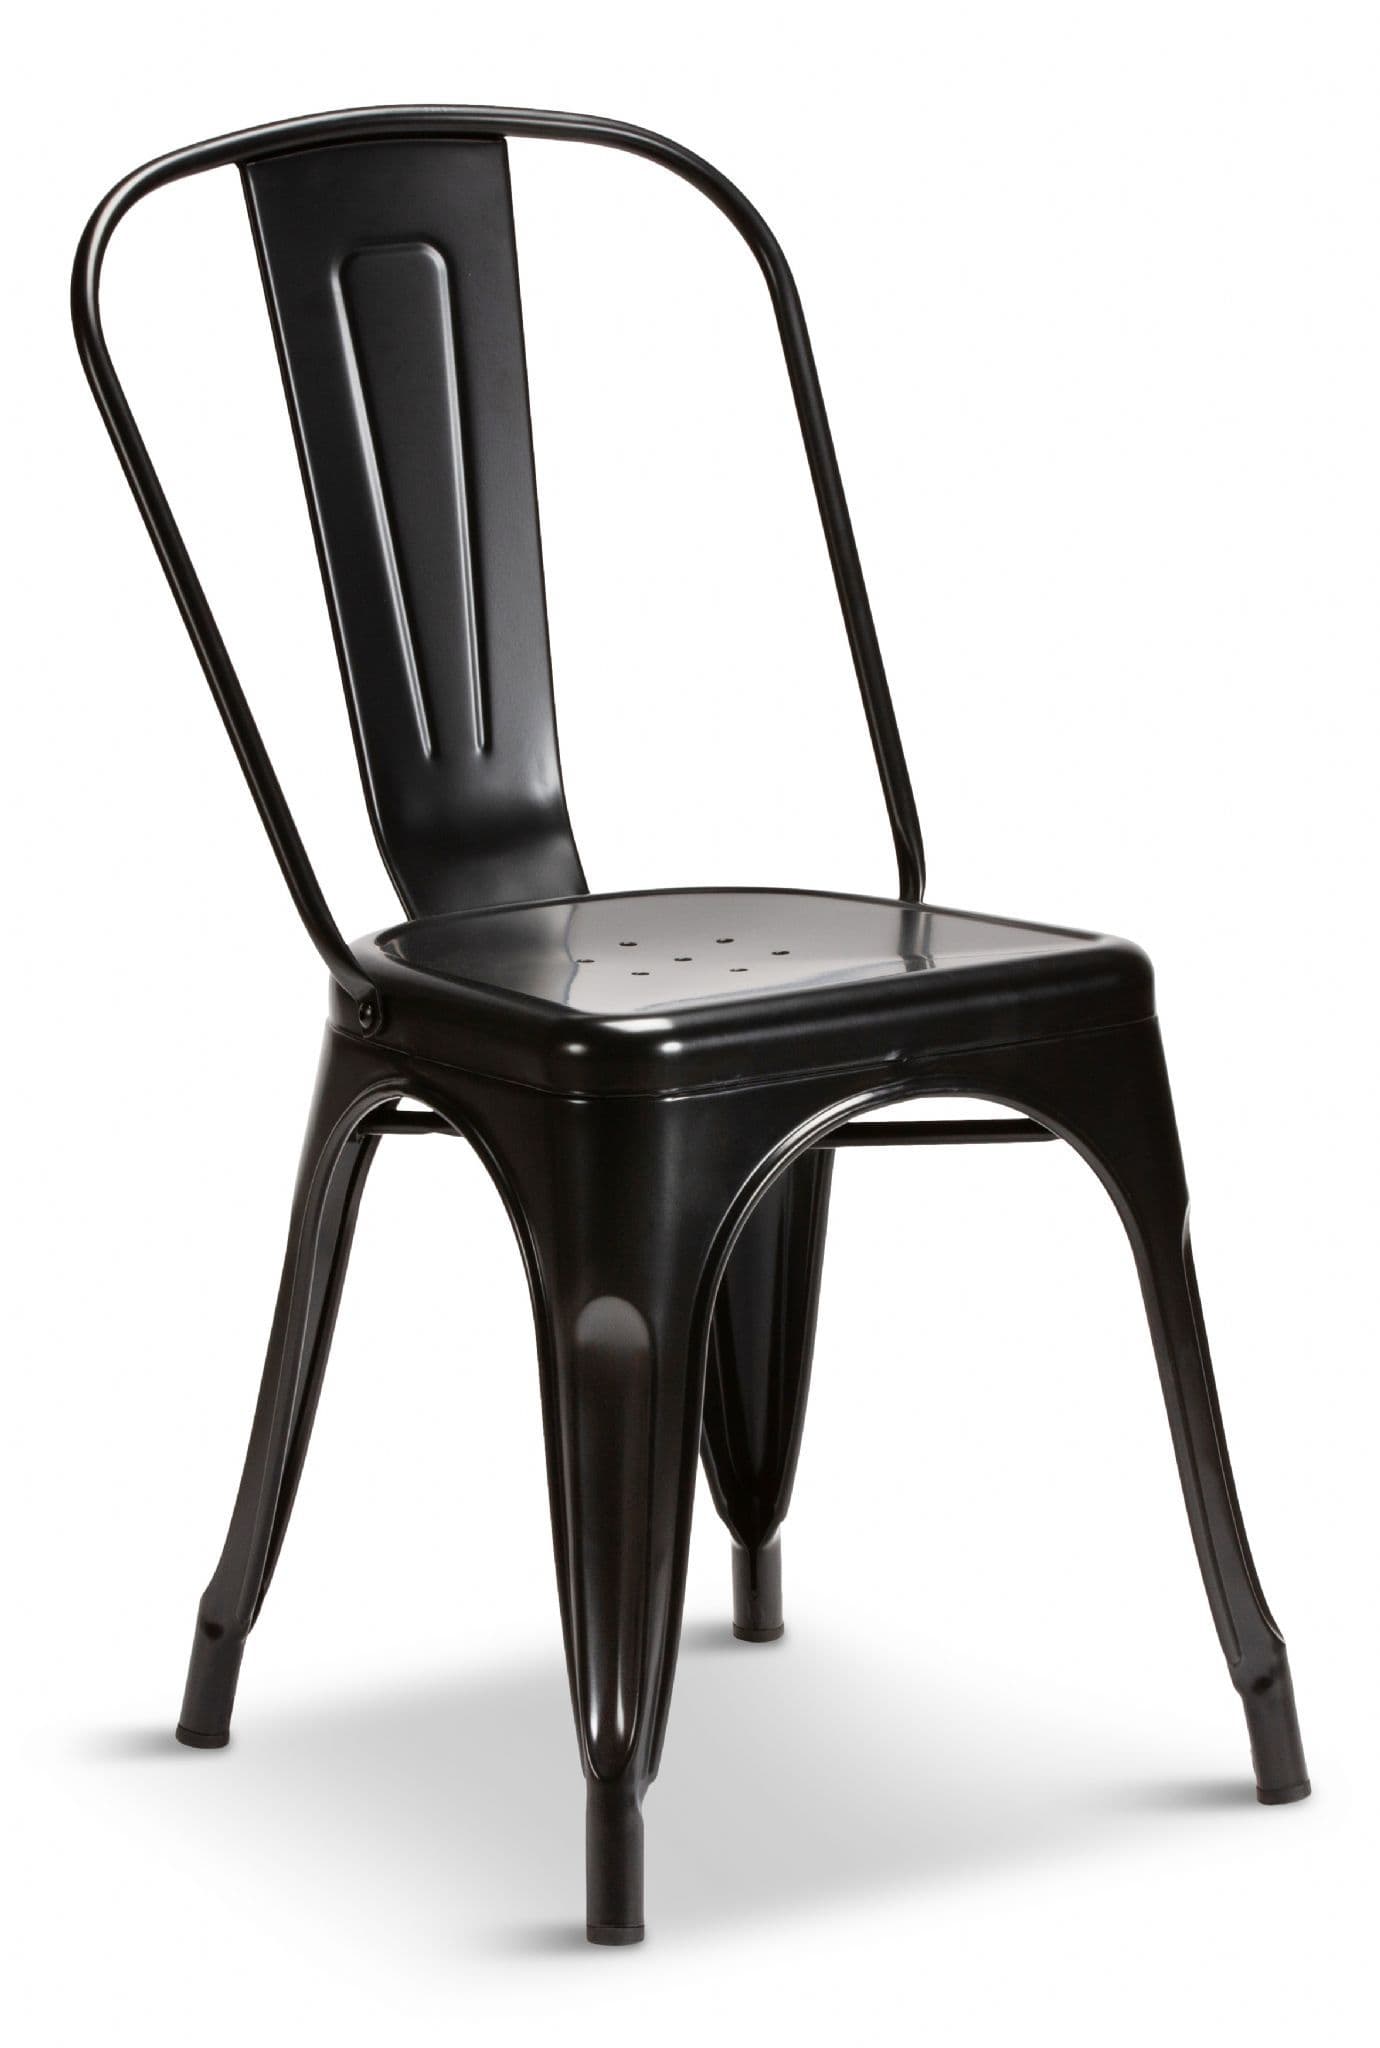 Matt Black Metal Industrial Tolix Style Dining Chairs Front View